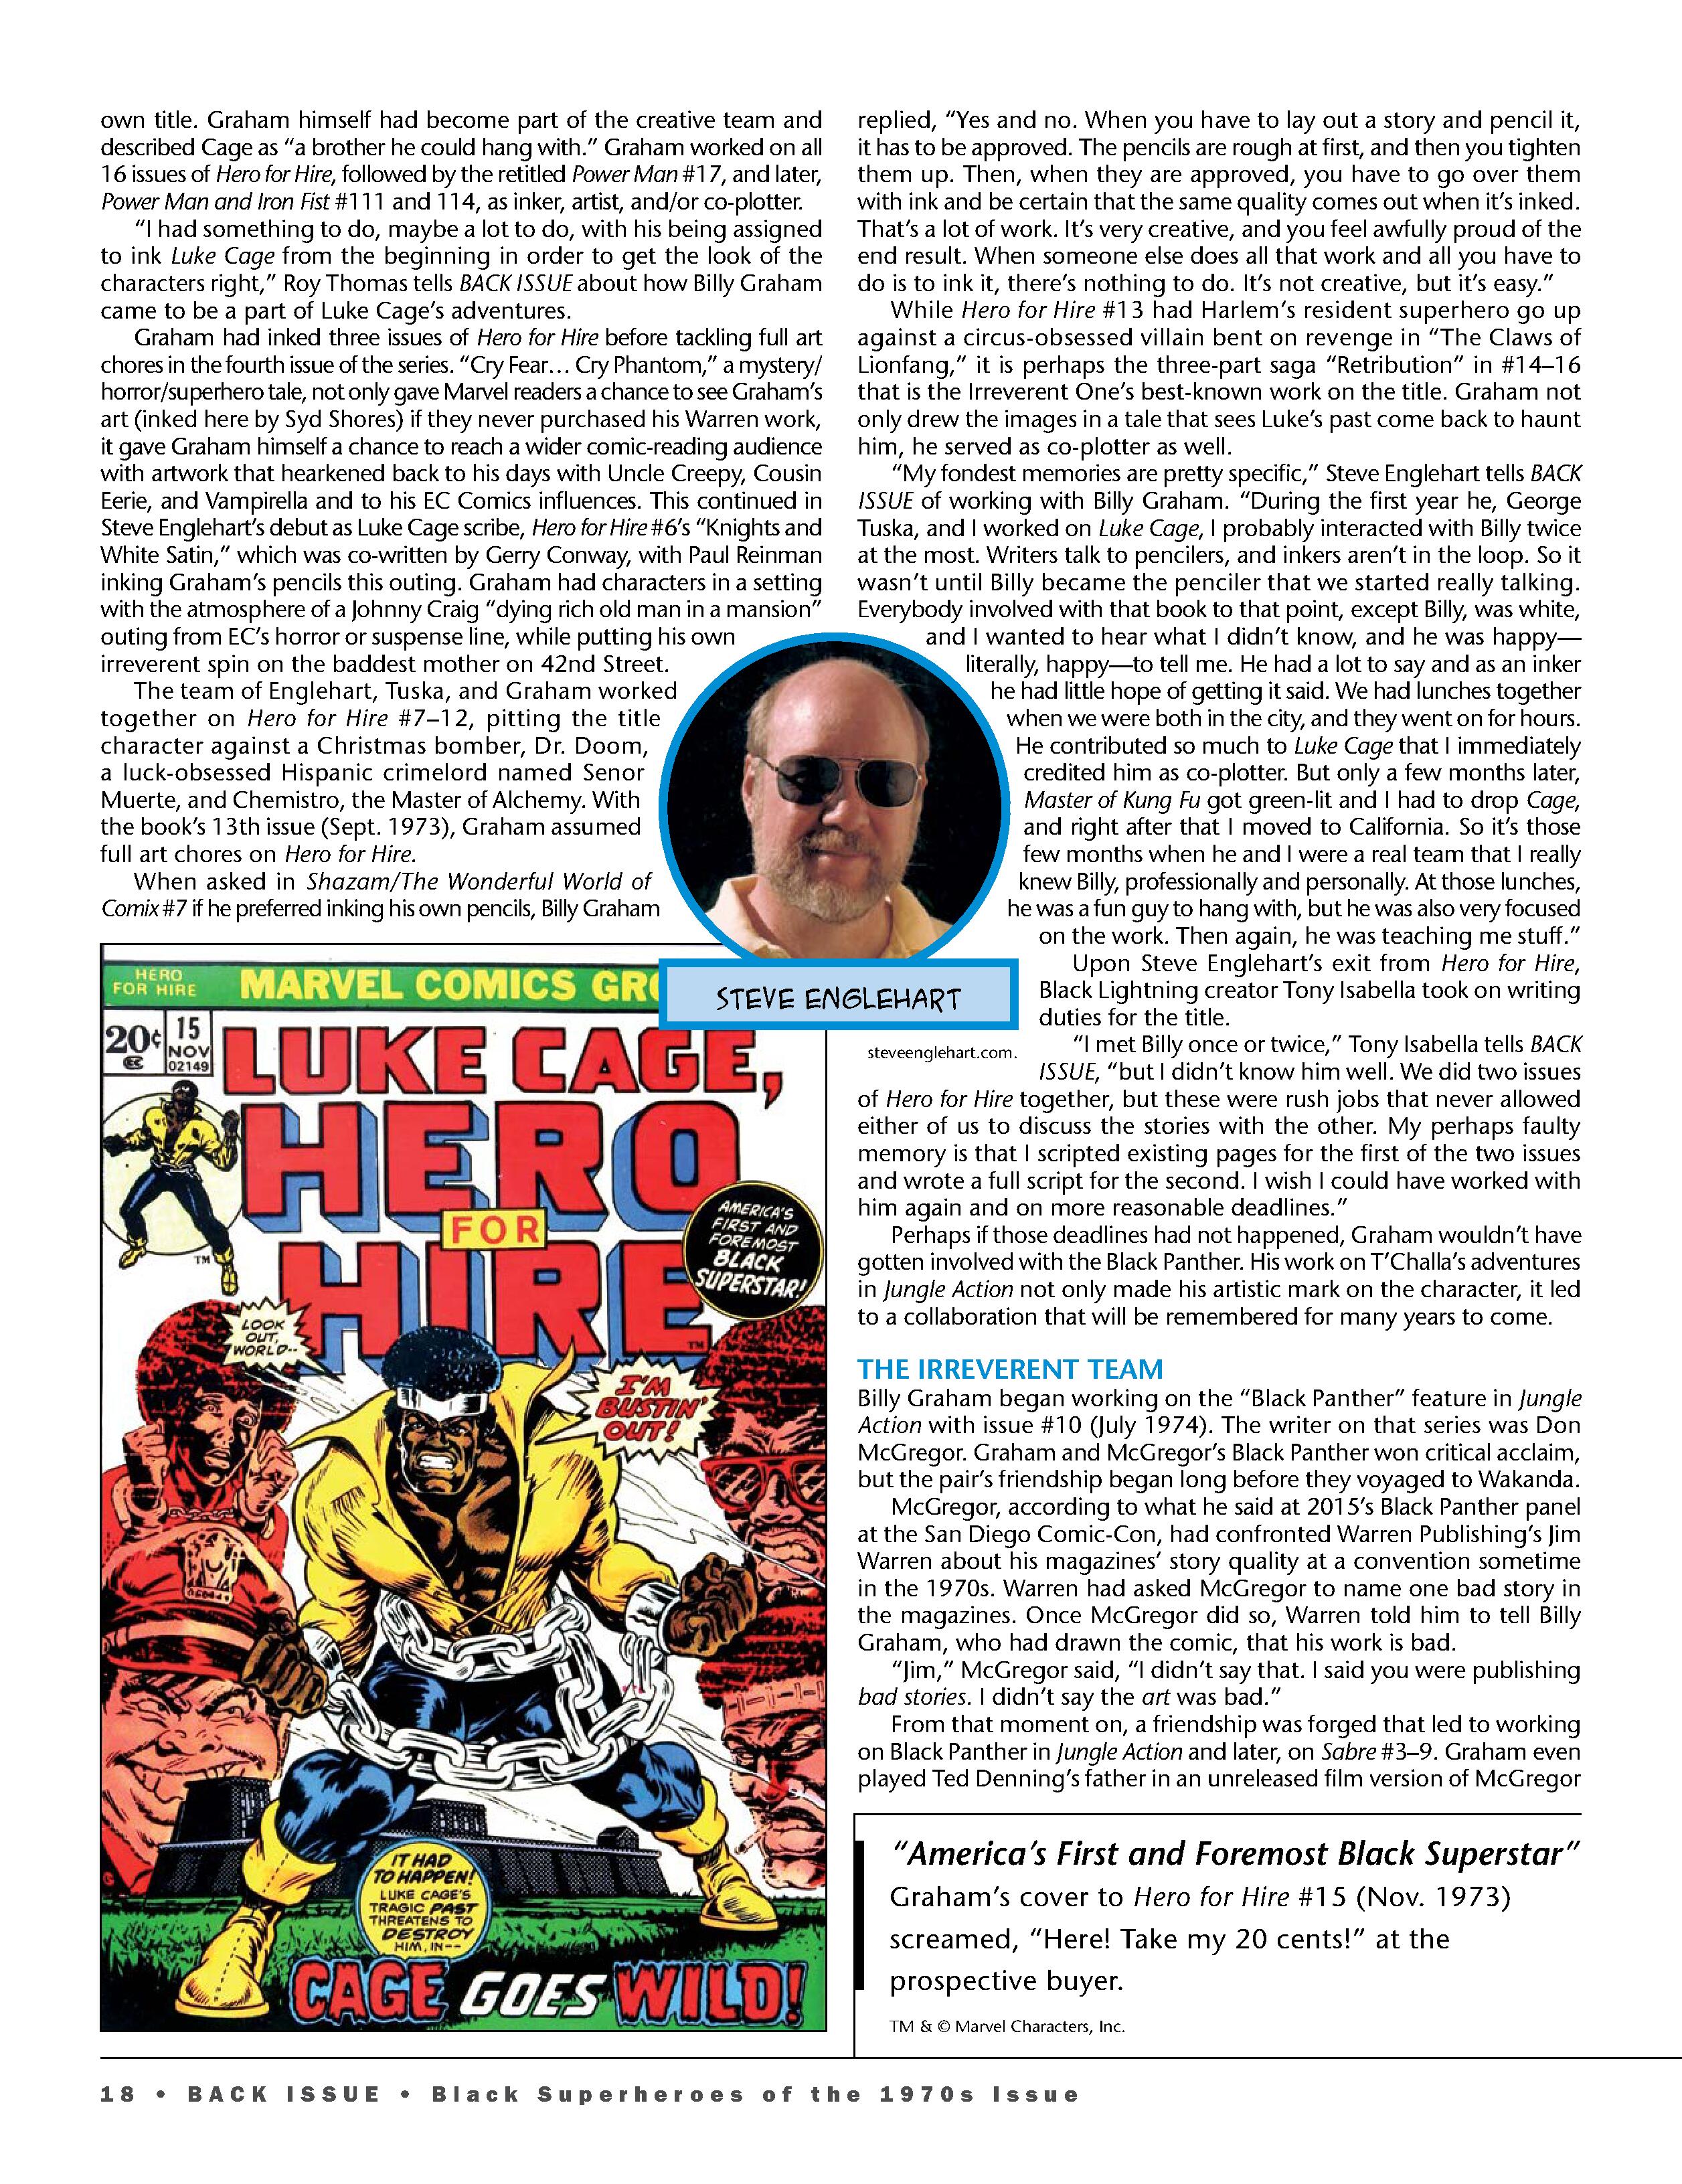 Read online Back Issue comic -  Issue #114 - 20